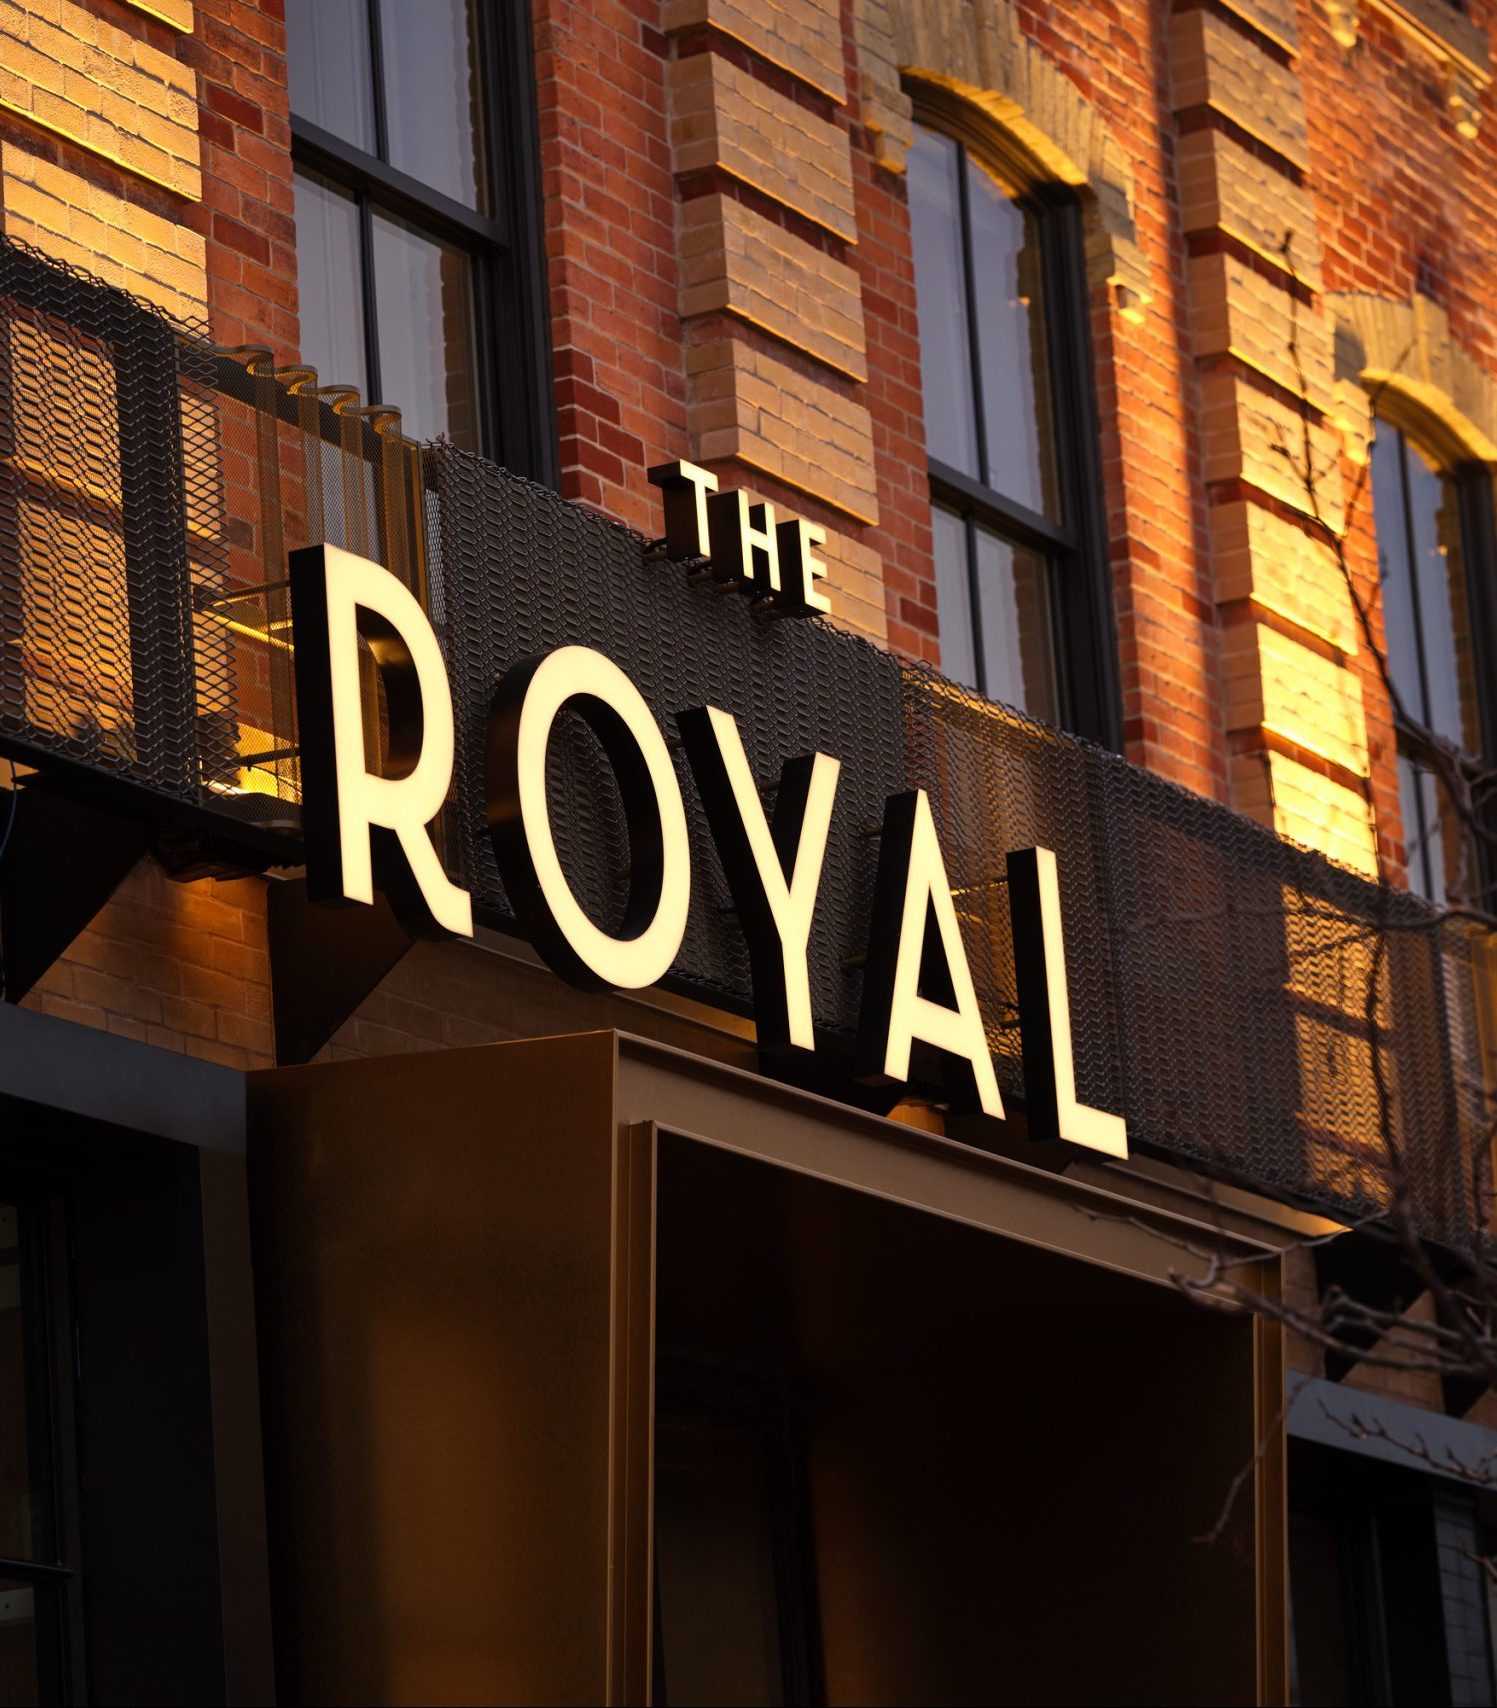 Front of a hotel with The Royal sign soaked in sun, 3 windows above